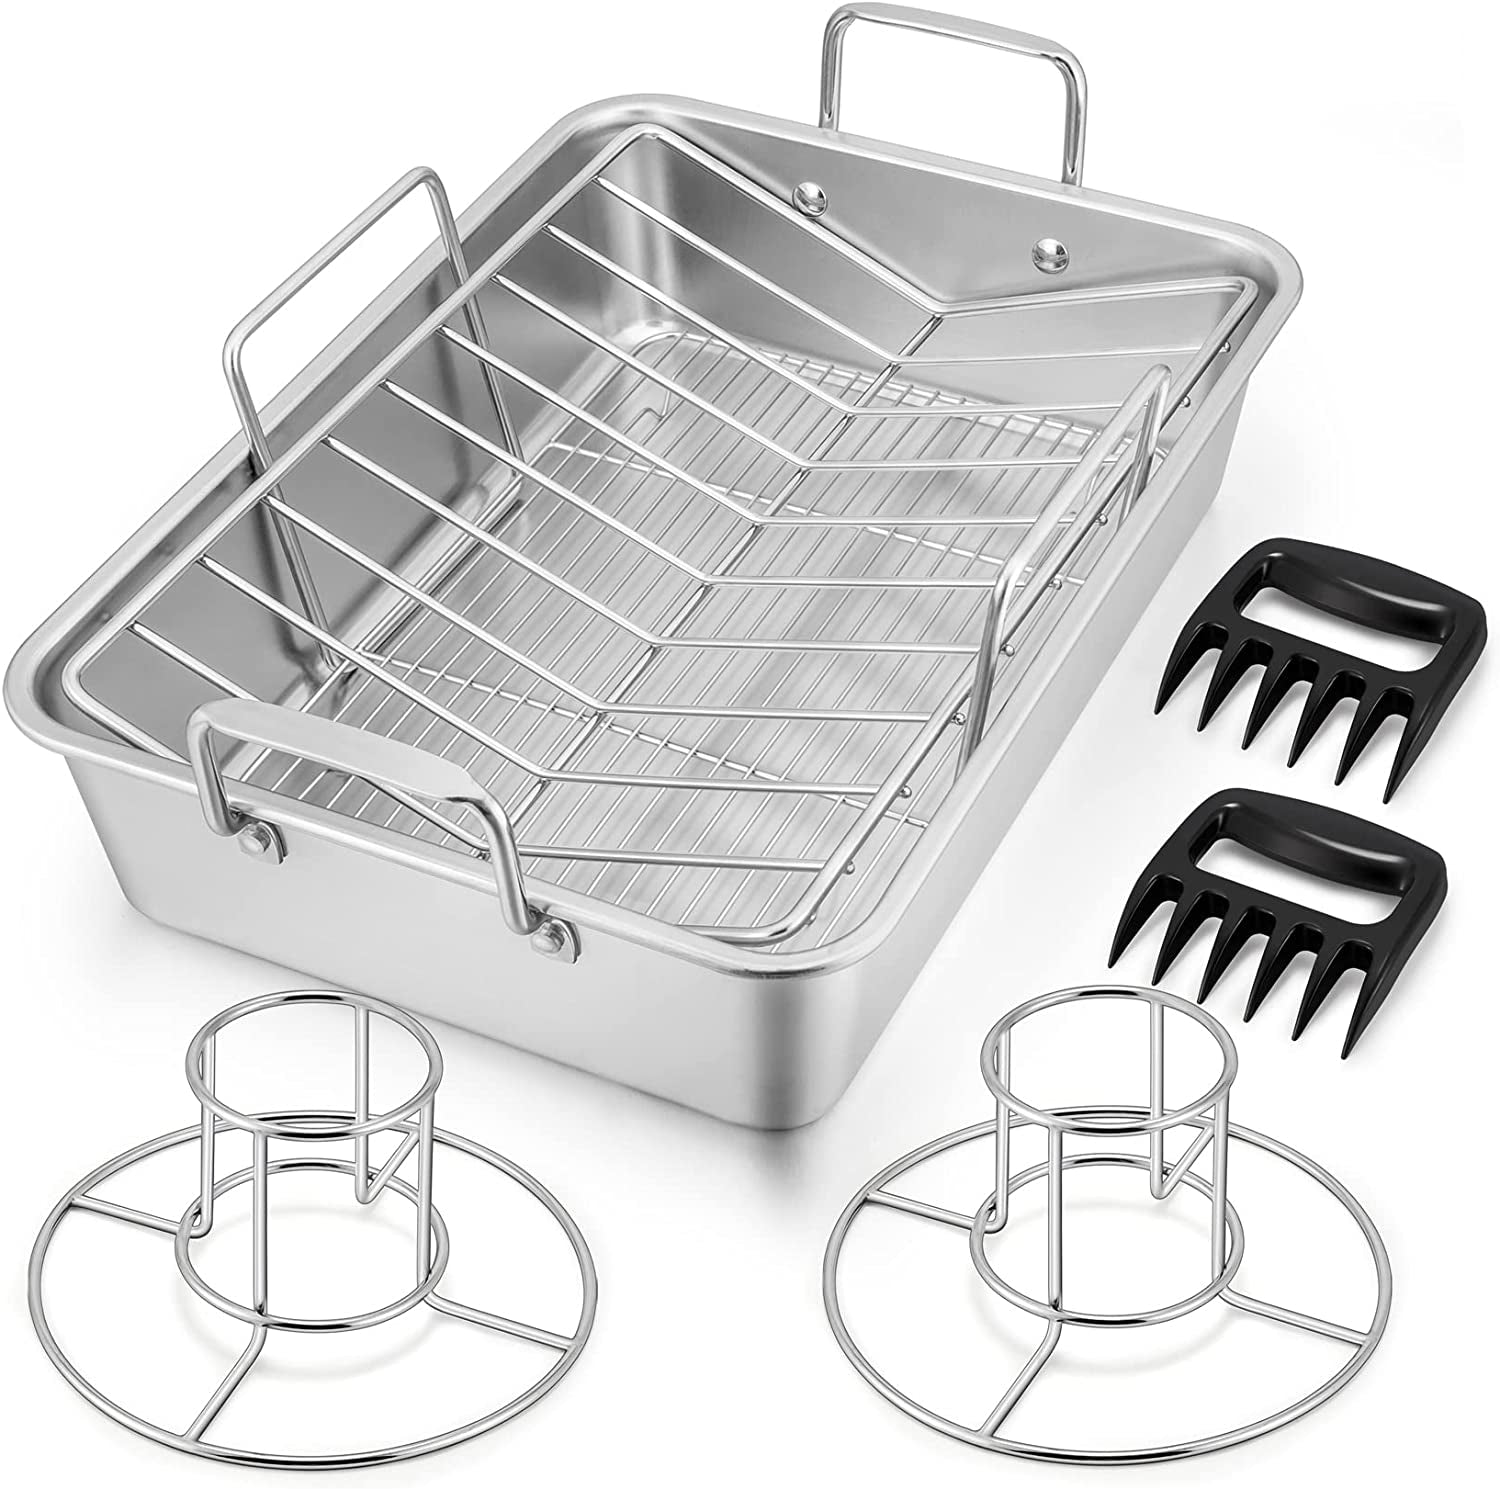 Baking Tray With Wire Rack Set 304 Stainless Steel Baking Sheet Pan BBQ  Tray Oven Rack For Cooking Roasting Grilling Baking Tool